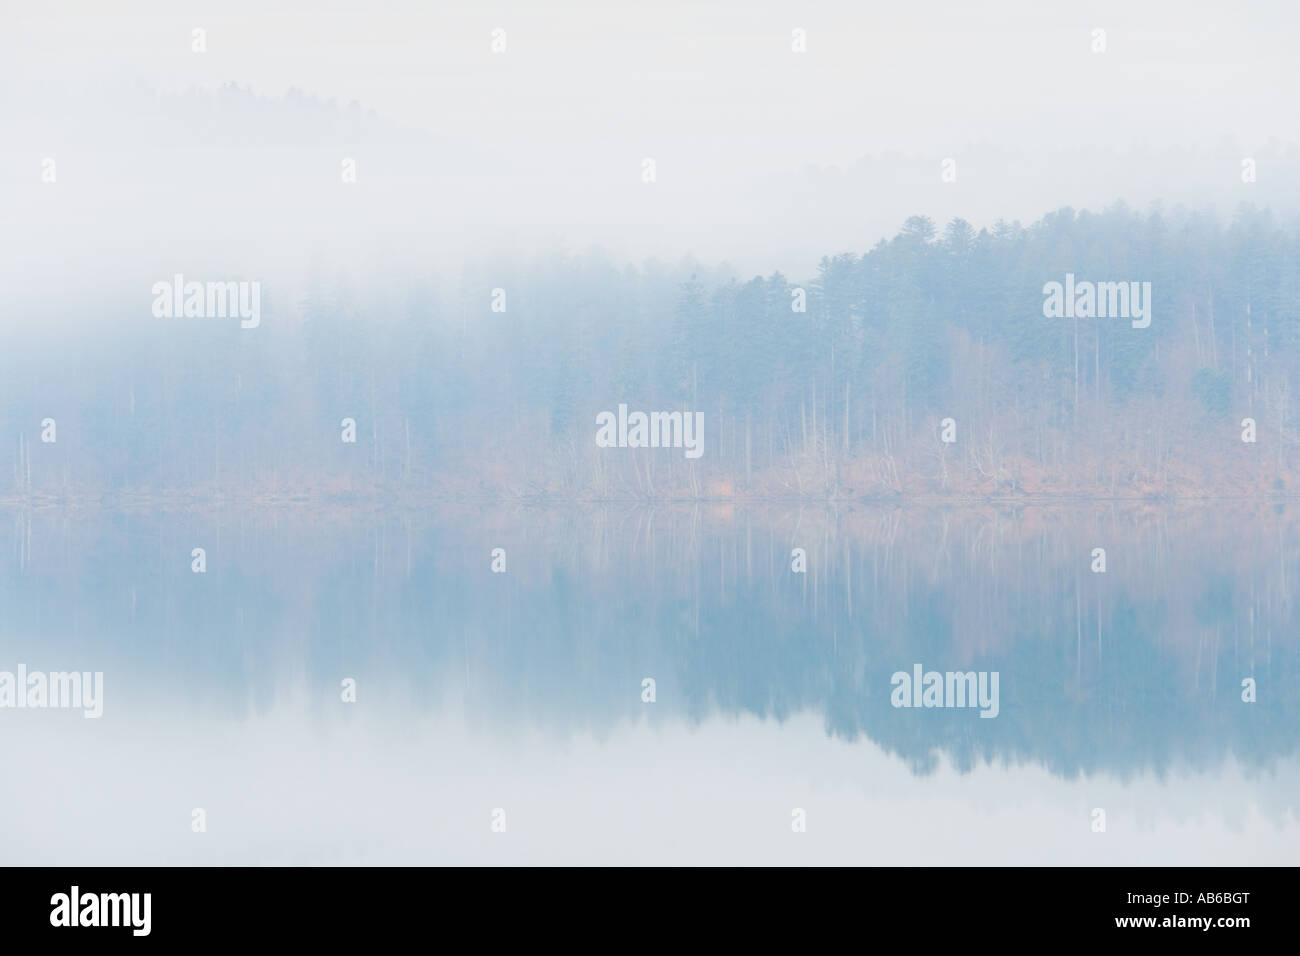 Forest on calm water surface Stock Photo